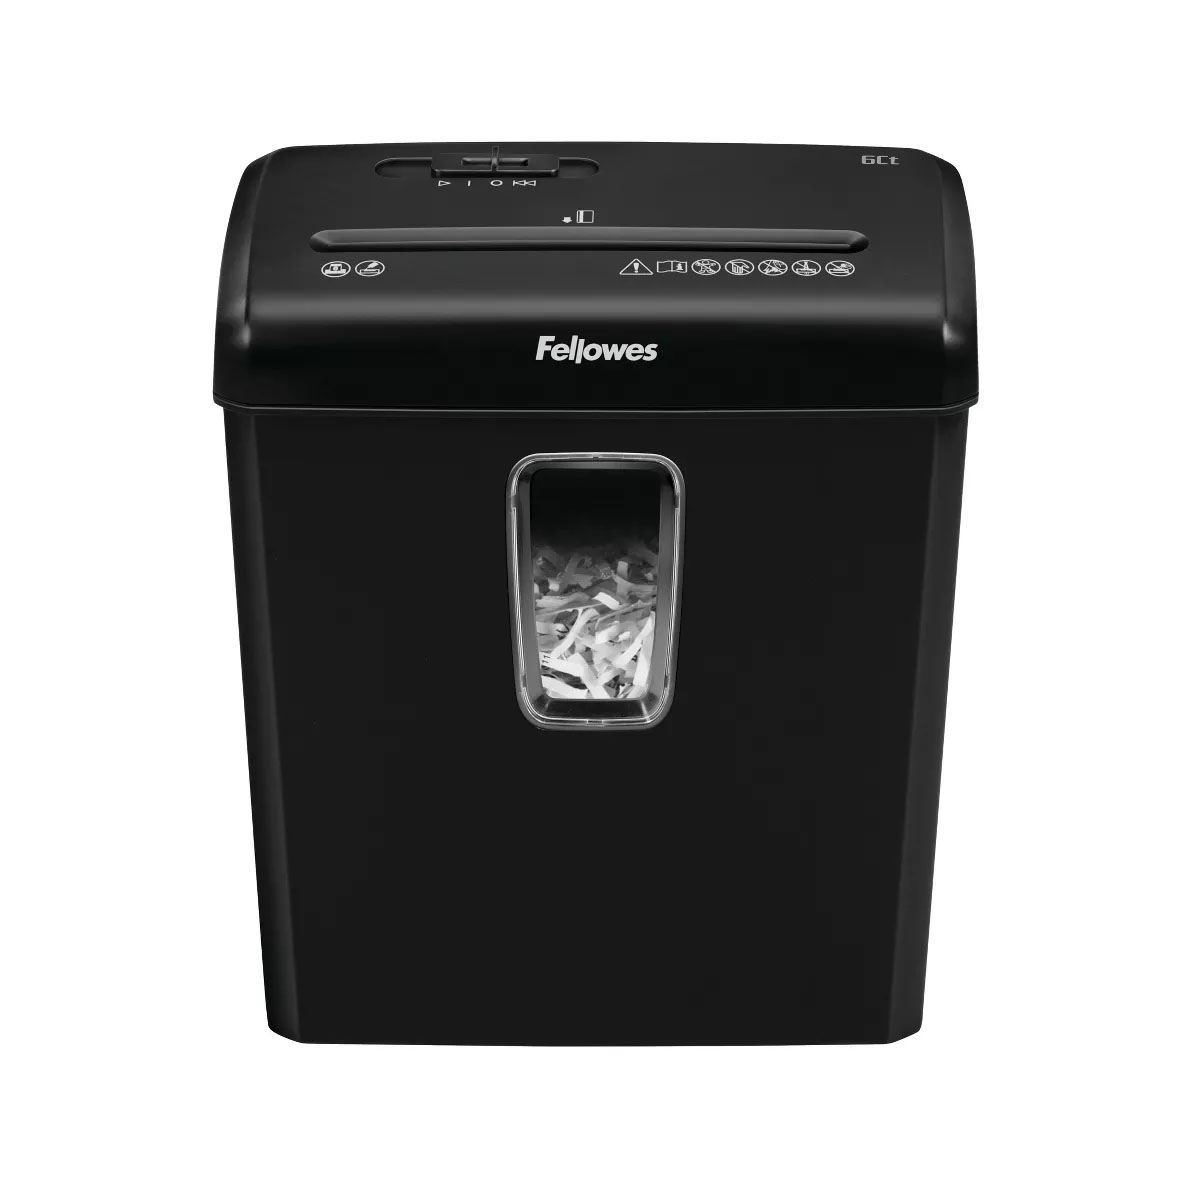 Fellowes Powershred 6ct Crosscut Paper Shredder with viewing window